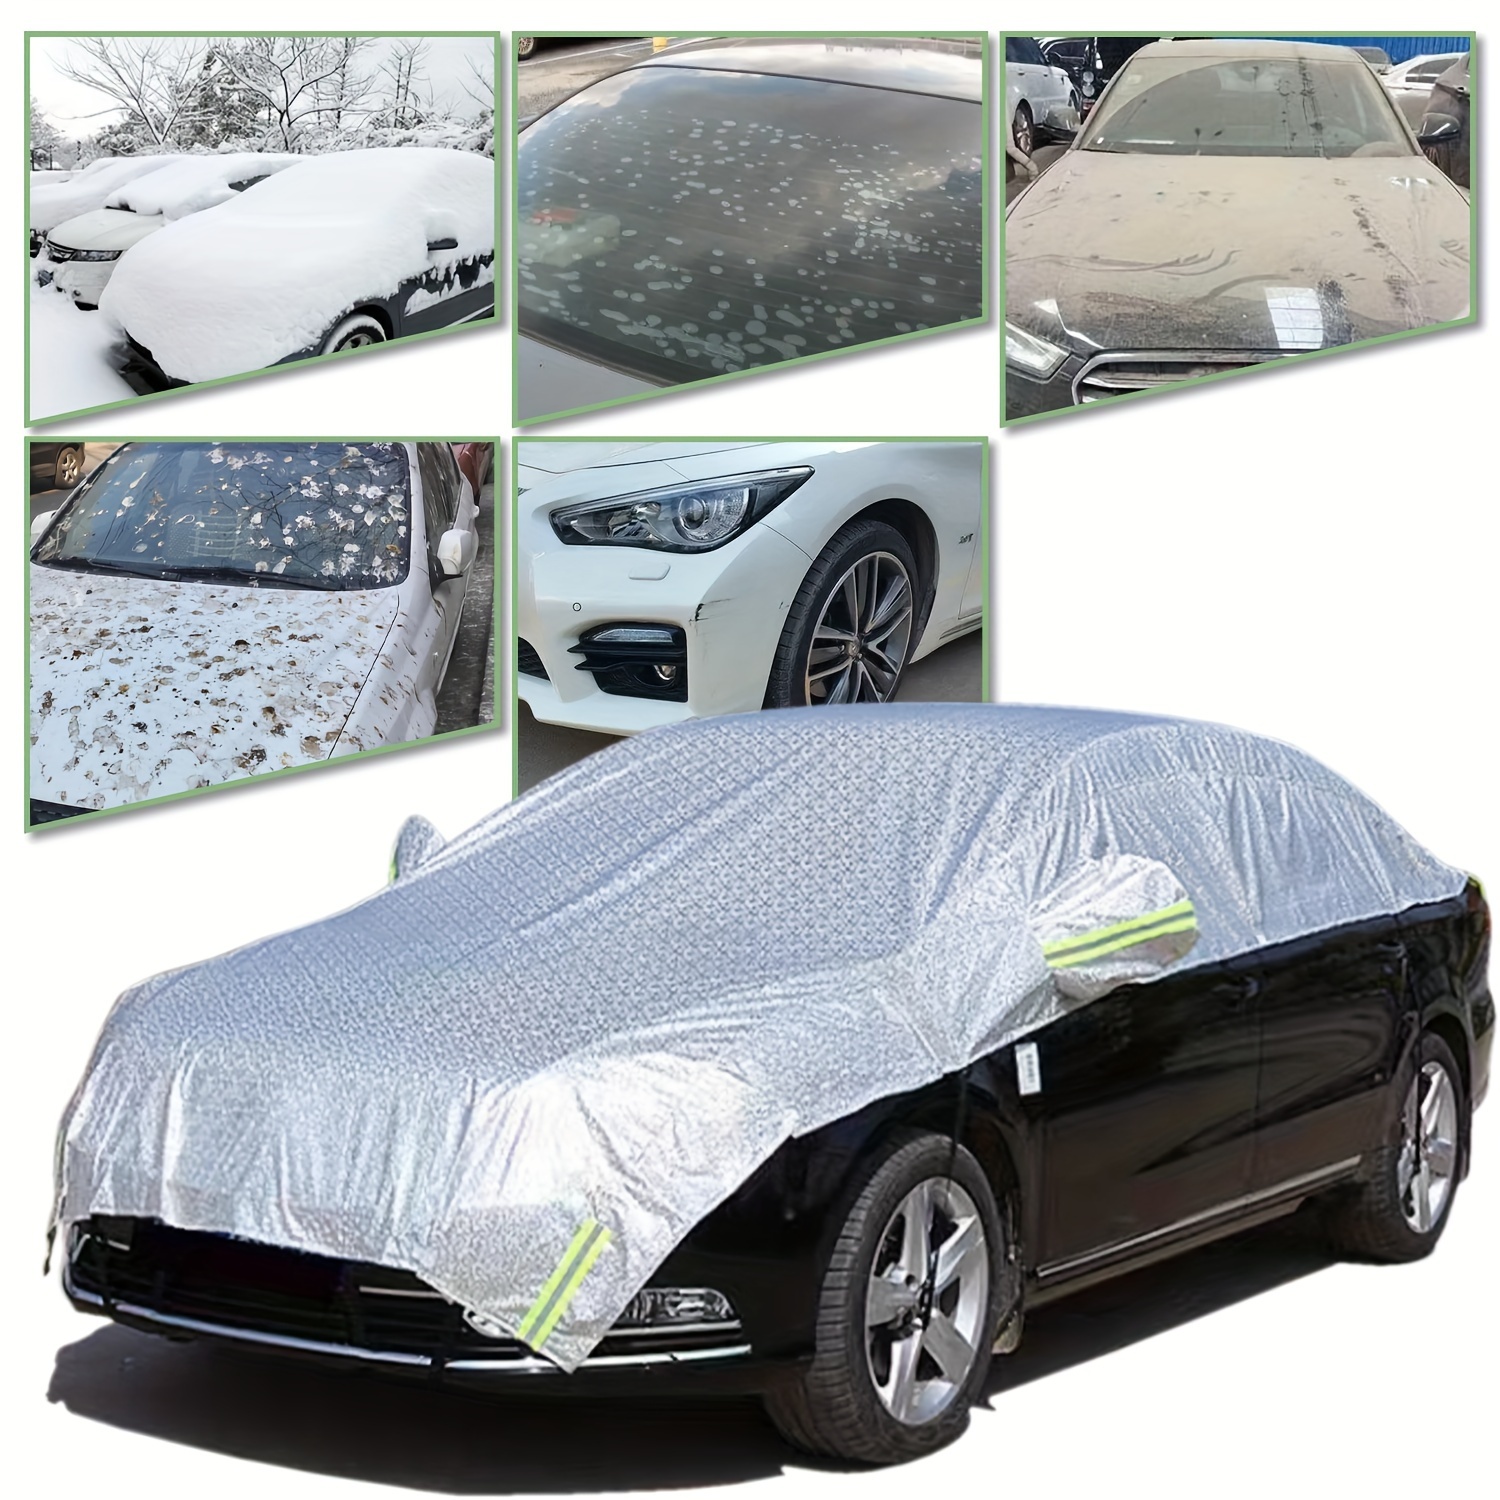 Half Car Cover With Cotton All Weather Car Body Covers Outdoor Indoor For  All Season Waterproof Dustproof Uv Resistant Snowproof Universal Fit Sedan2